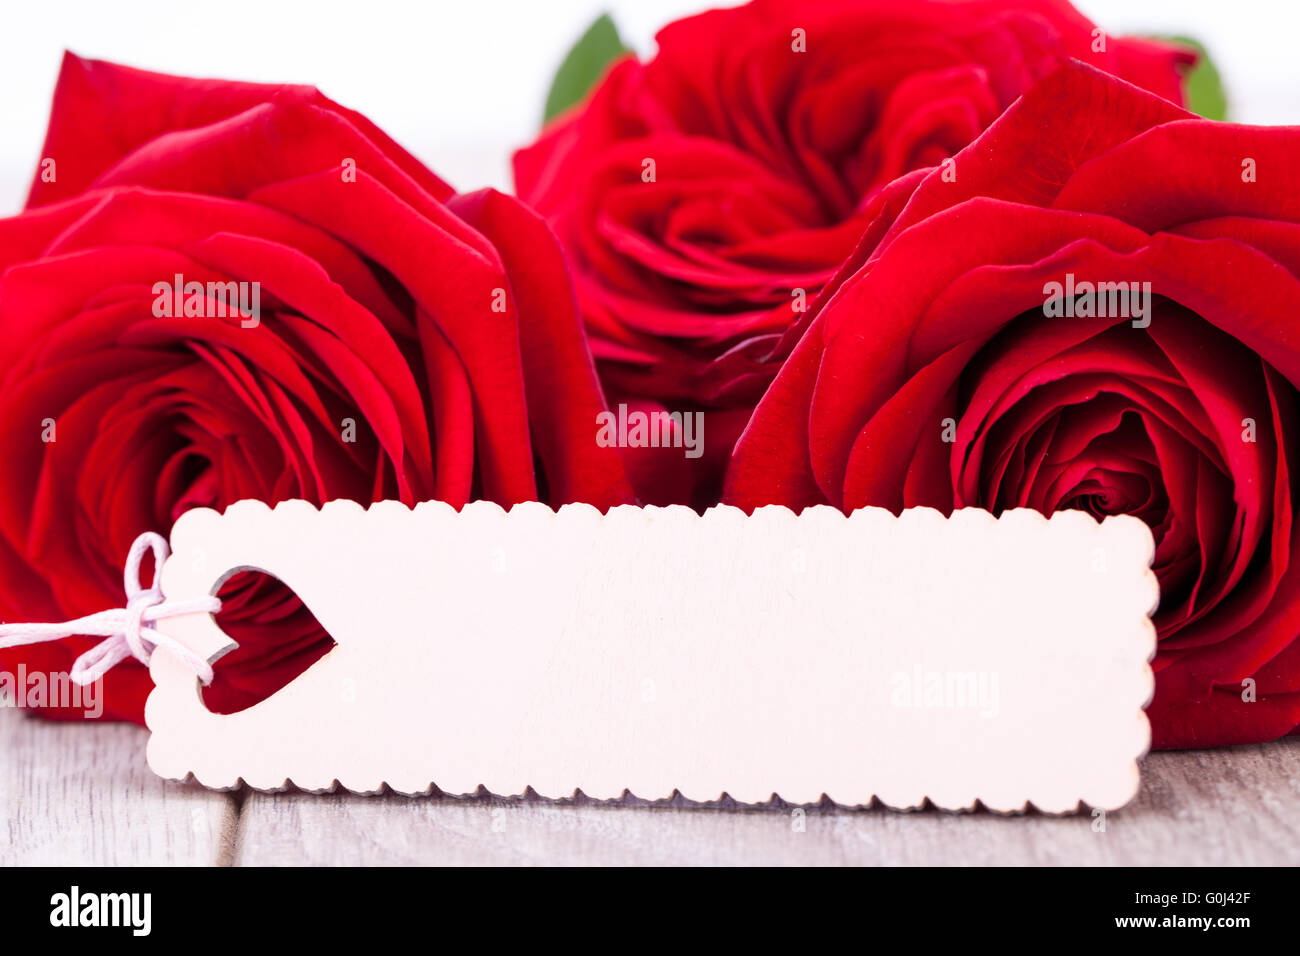 Valentines gift of beautiful red roses Stock Photo